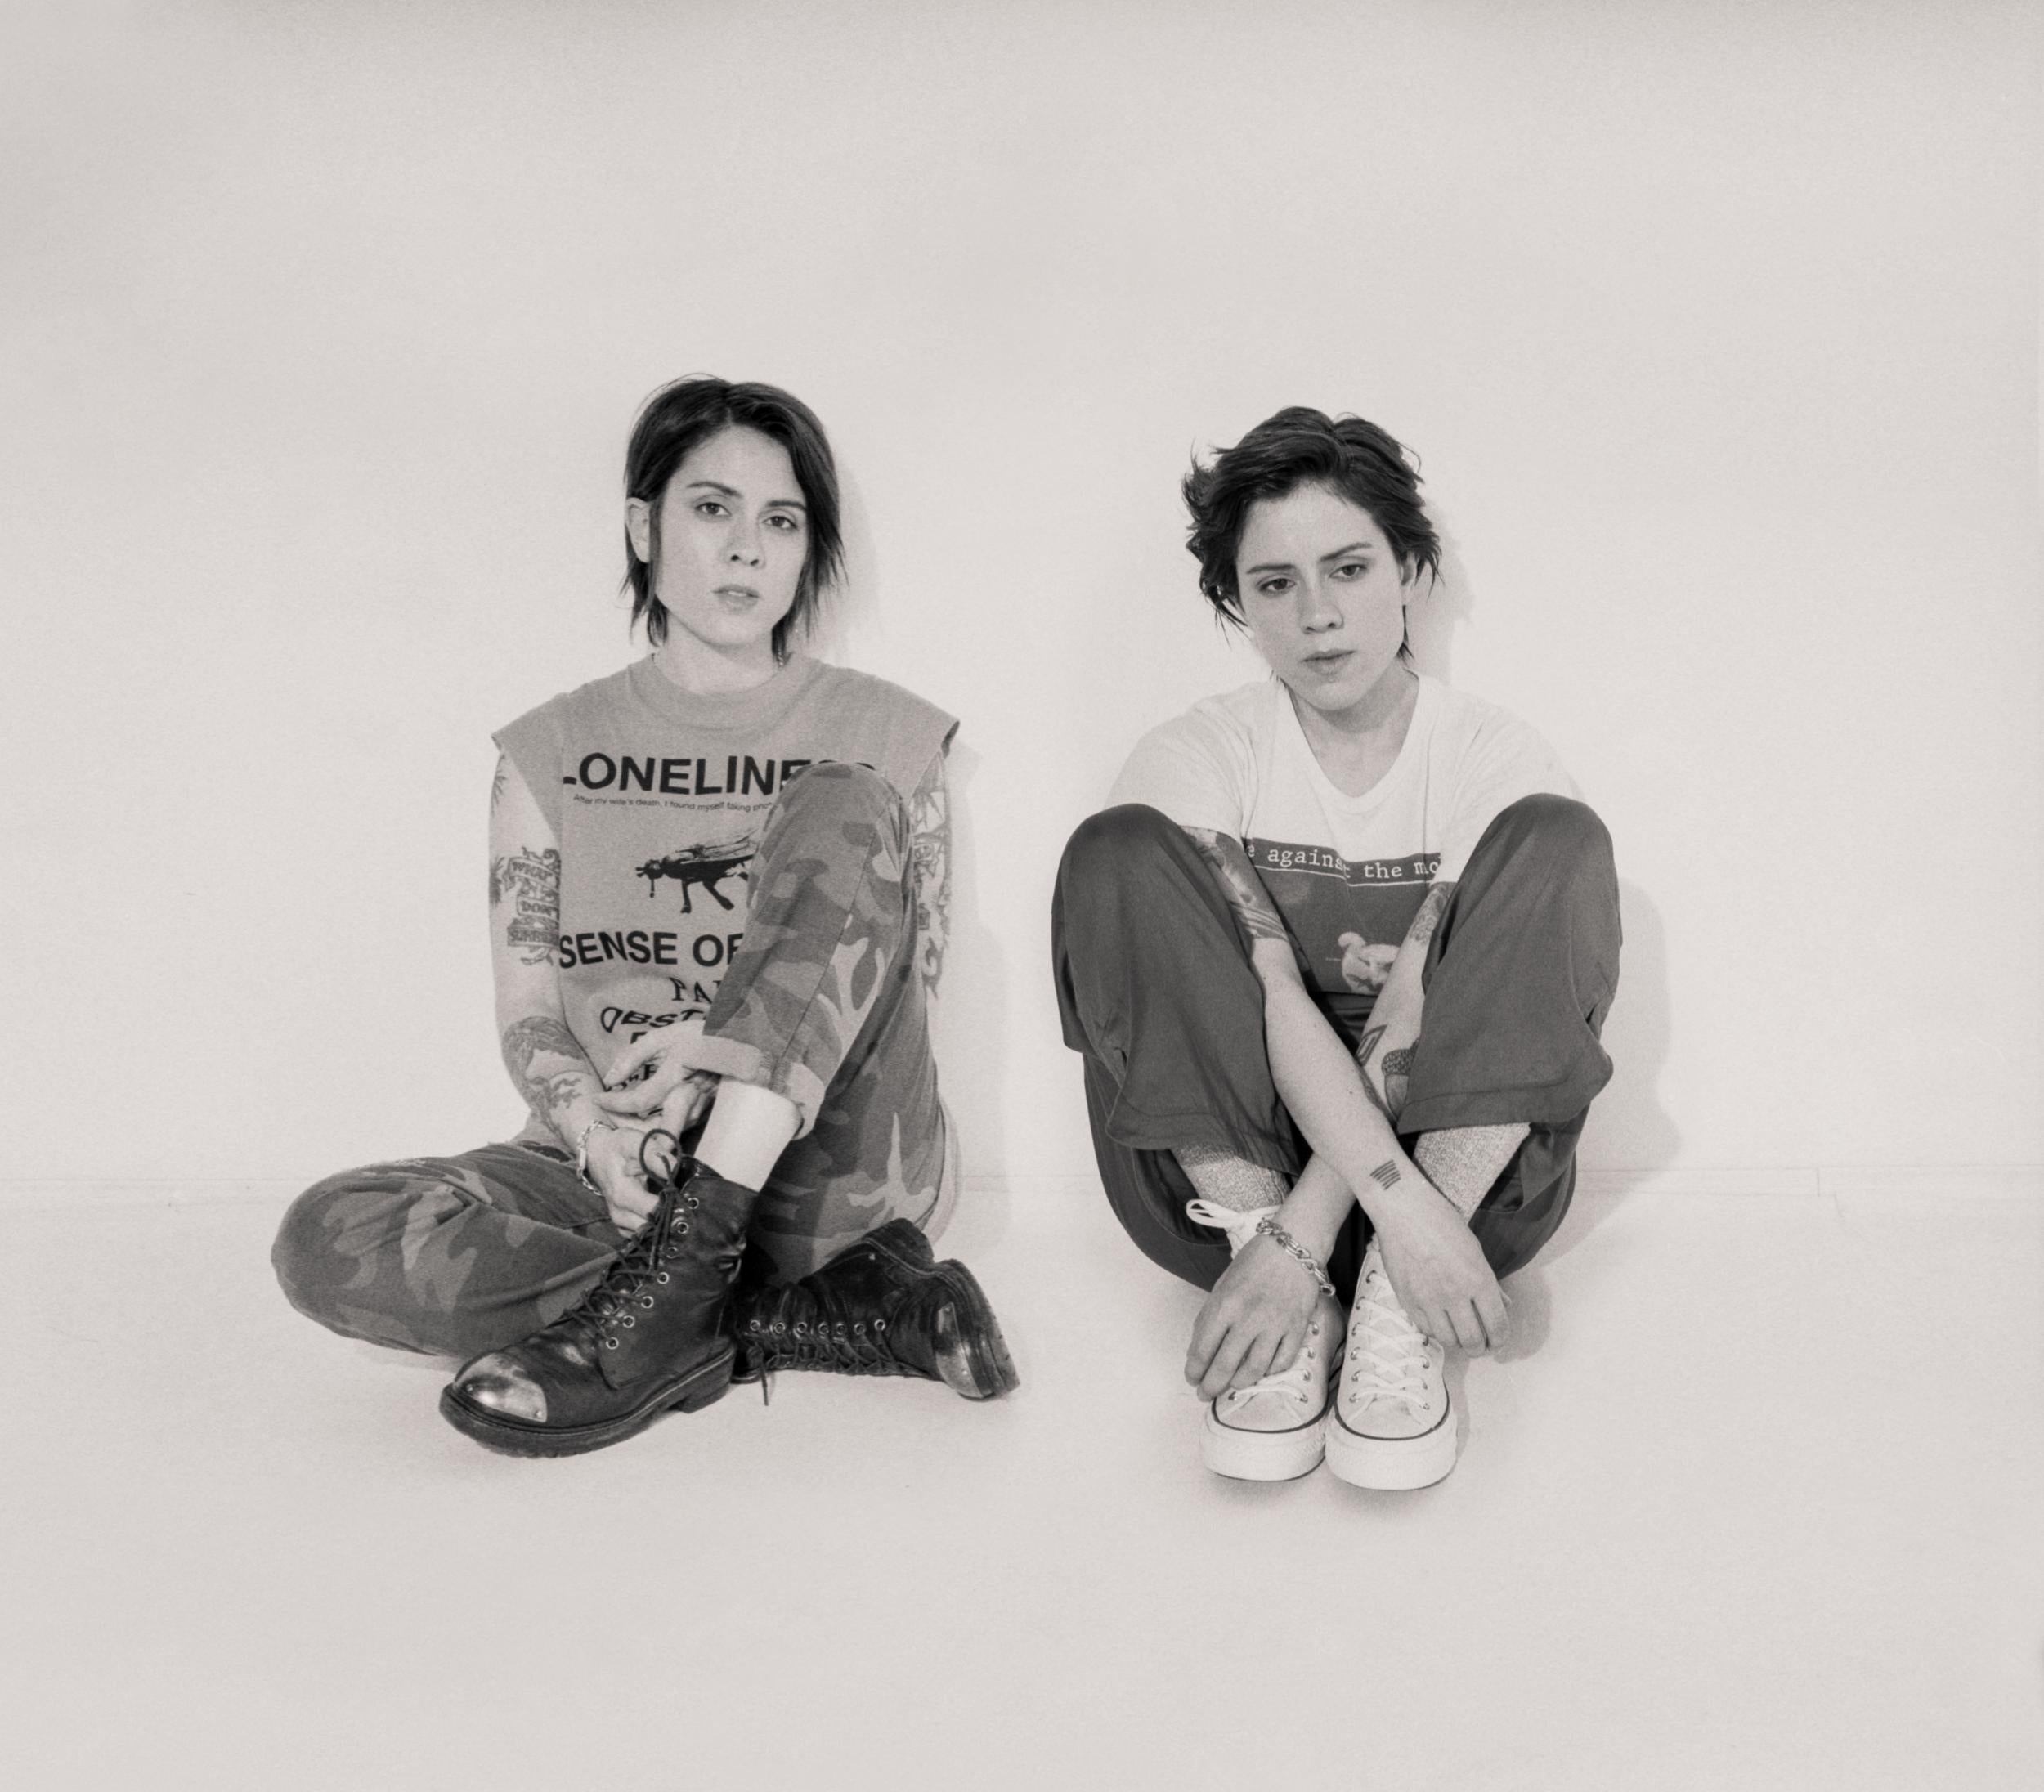 Tegan and Sara’s last album, 2016’s ‘Love You To Death’, was a big, bold stadium-pop record; this one is less polished, but just as punchy